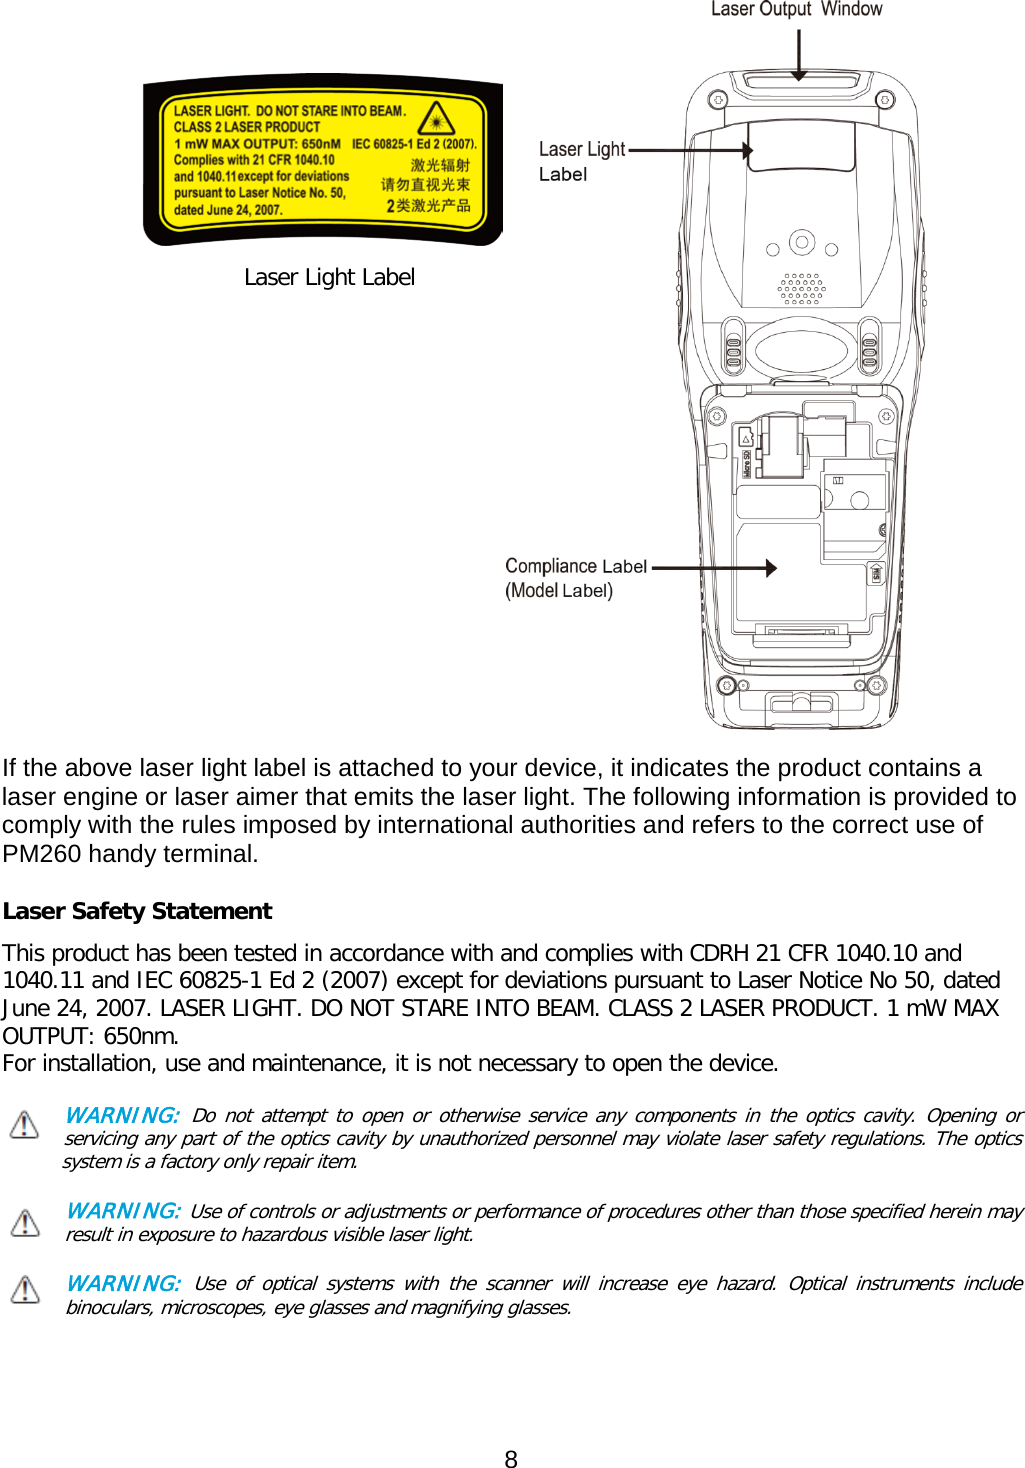                                              Laser Light Label                        If the above laser light label is attached to your device, it indicates the product contains a laser engine or laser aimer that emits the laser light. The following information is provided to comply with the rules imposed by international authorities and refers to the correct use of PM260 handy terminal.    Laser Safety Statement This product has been tested in accordance with and complies with CDRH 21 CFR 1040.10 and 1040.11 and IEC 60825-1 Ed 2 (2007) except for deviations pursuant to Laser Notice No 50, dated June 24, 2007. LASER LIGHT. DO NOT STARE INTO BEAM. CLASS 2 LASER PRODUCT. 1 mW MAX OUTPUT: 650nm. For installation, use and maintenance, it is not necessary to open the device.  WARNING: Do not attempt to open or otherwise service any components in the optics cavity. Opening or servicing any part of the optics cavity by unauthorized personnel may violate laser safety regulations. The optics     system is a factory only repair item.  WARNING: Use of controls or adjustments or performance of procedures other than those specified herein may result in exposure to hazardous visible laser light.   WARNING: Use of optical systems with the scanner will increase eye hazard. Optical instruments include binoculars, microscopes, eye glasses and magnifying glasses.    8  